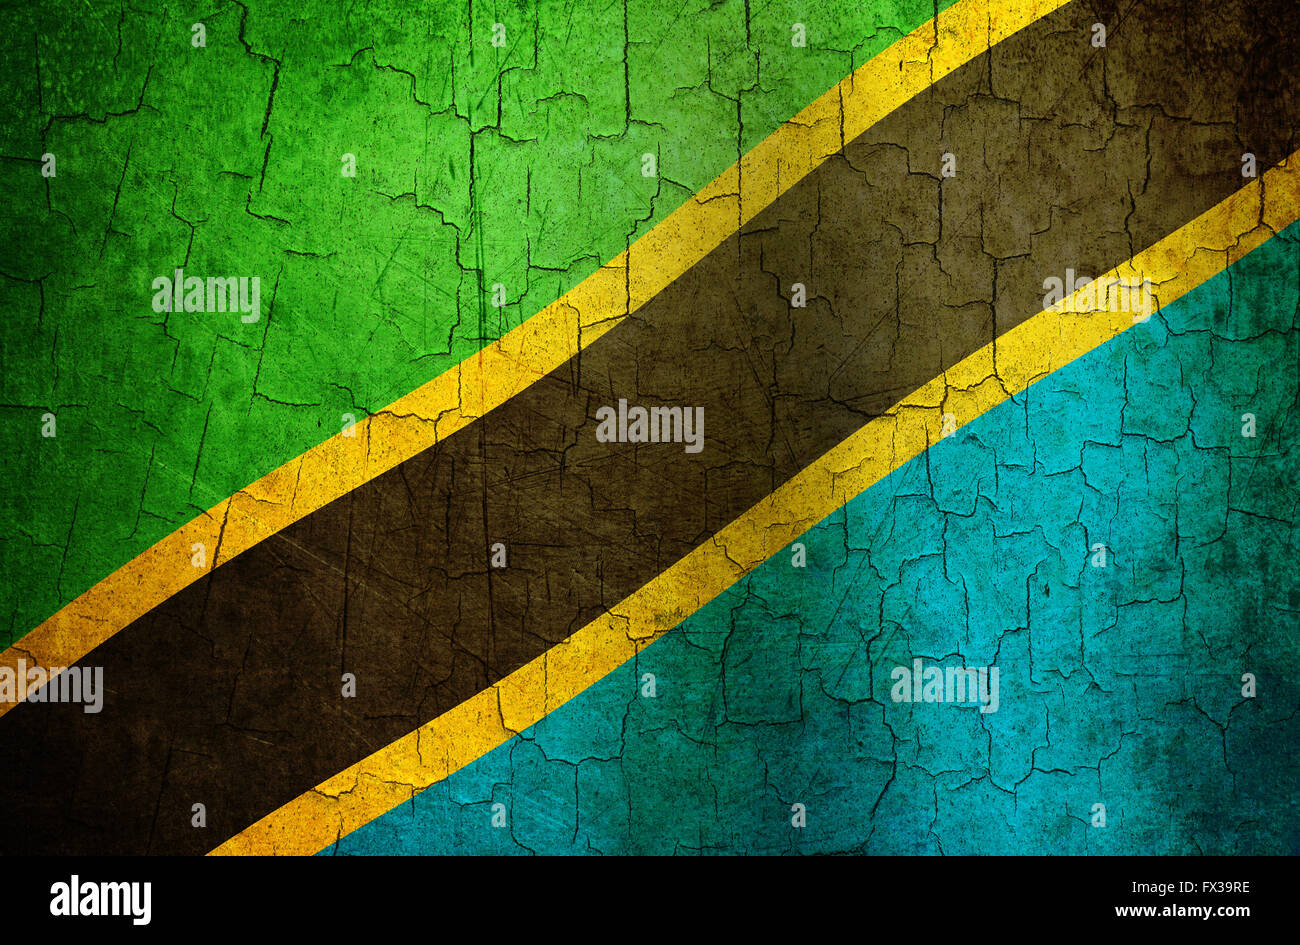 Tanzania flag on an old cracked wall Stock Photo